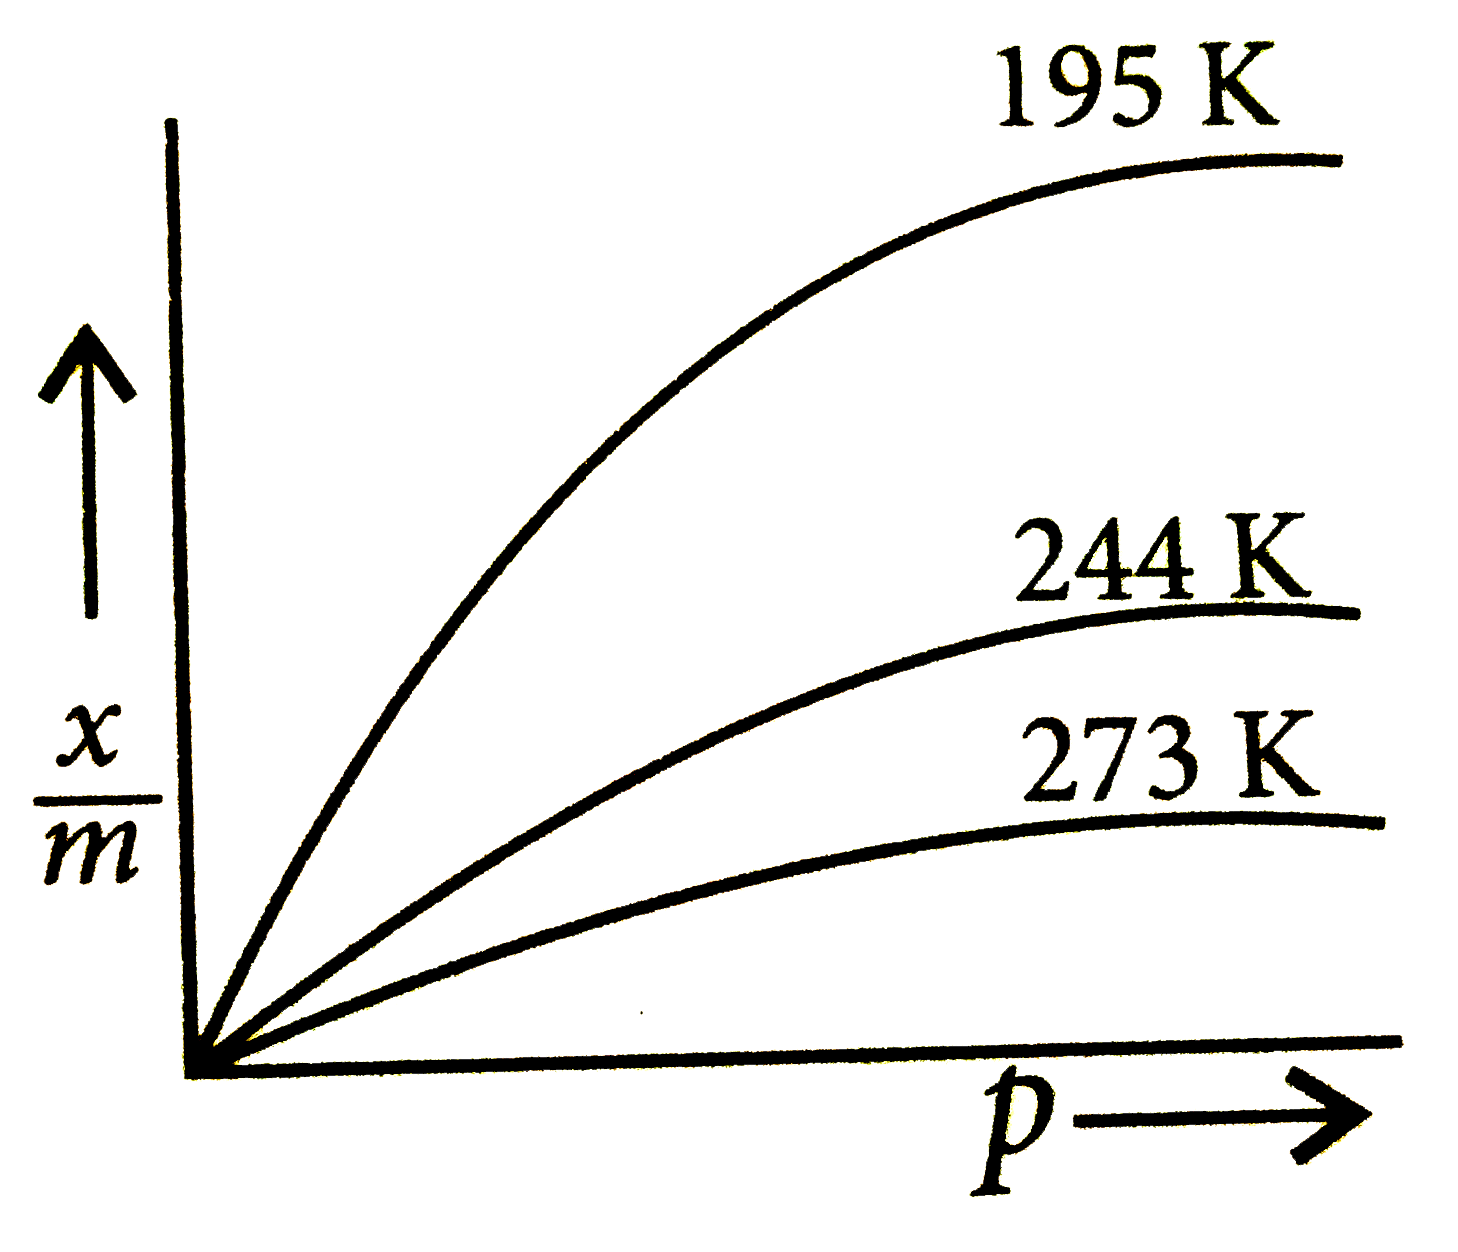 Observe the given adsorption isotherm carefully and choose the correct option       (i) These curves indicates that at a fixed temperature, there is a decrease in physical adsorption with increase in pressure.   (ii) These curves always seem to approach saturation at high pressure.     x/m=k*p^(1//n) (n gt 1) is generally represented by this isotherm.    (iv) These curves indicate that at a fixed pressure, there is a decrease in physcial adsorption with increase in temperature .